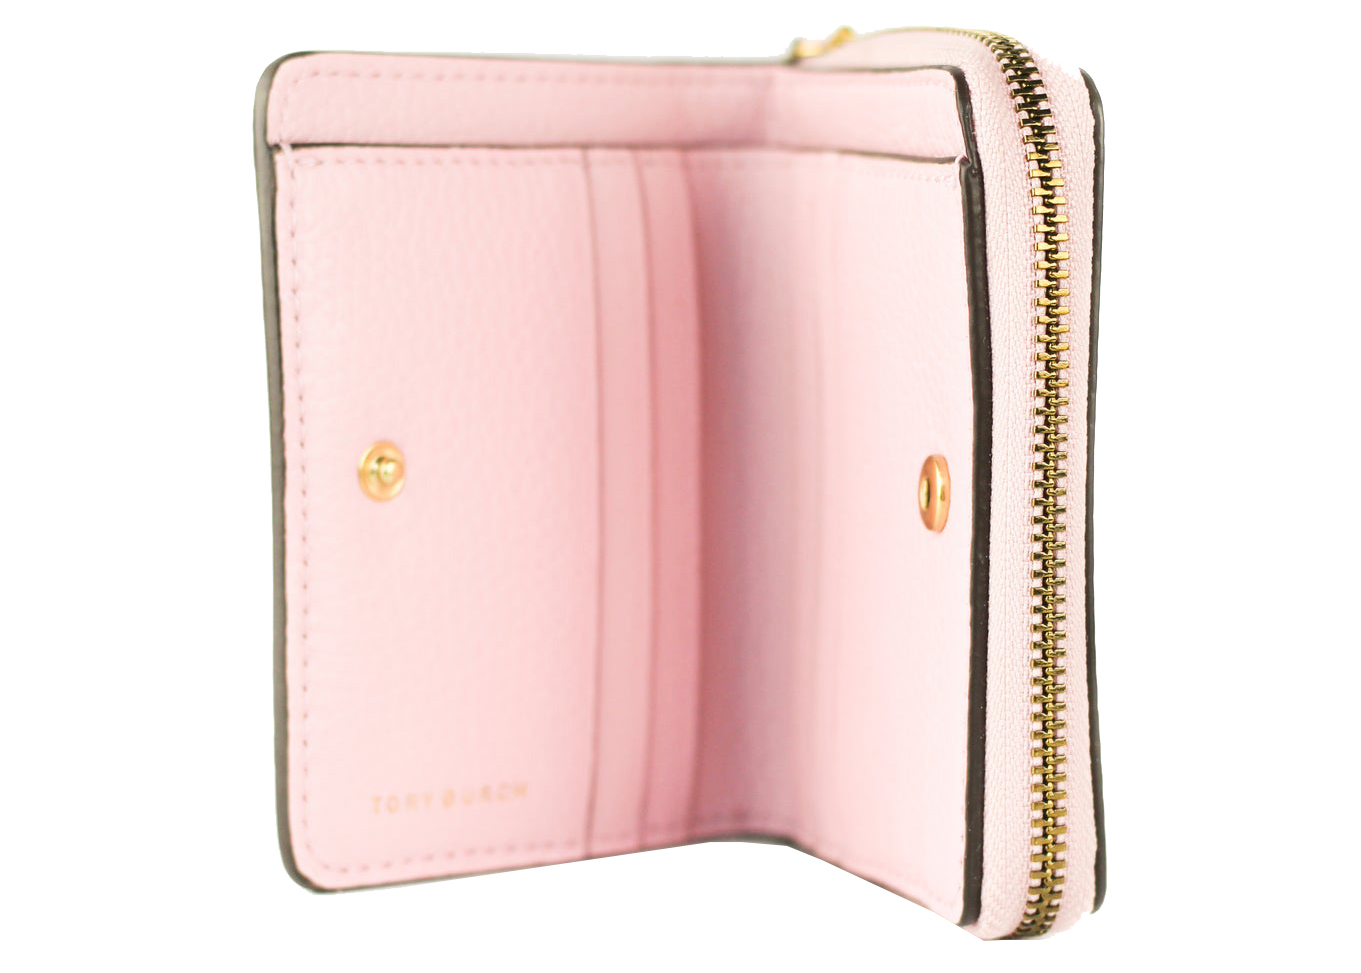 Tory Burch Britten Zip Card Coin Wallet Mini Surprise Lily in